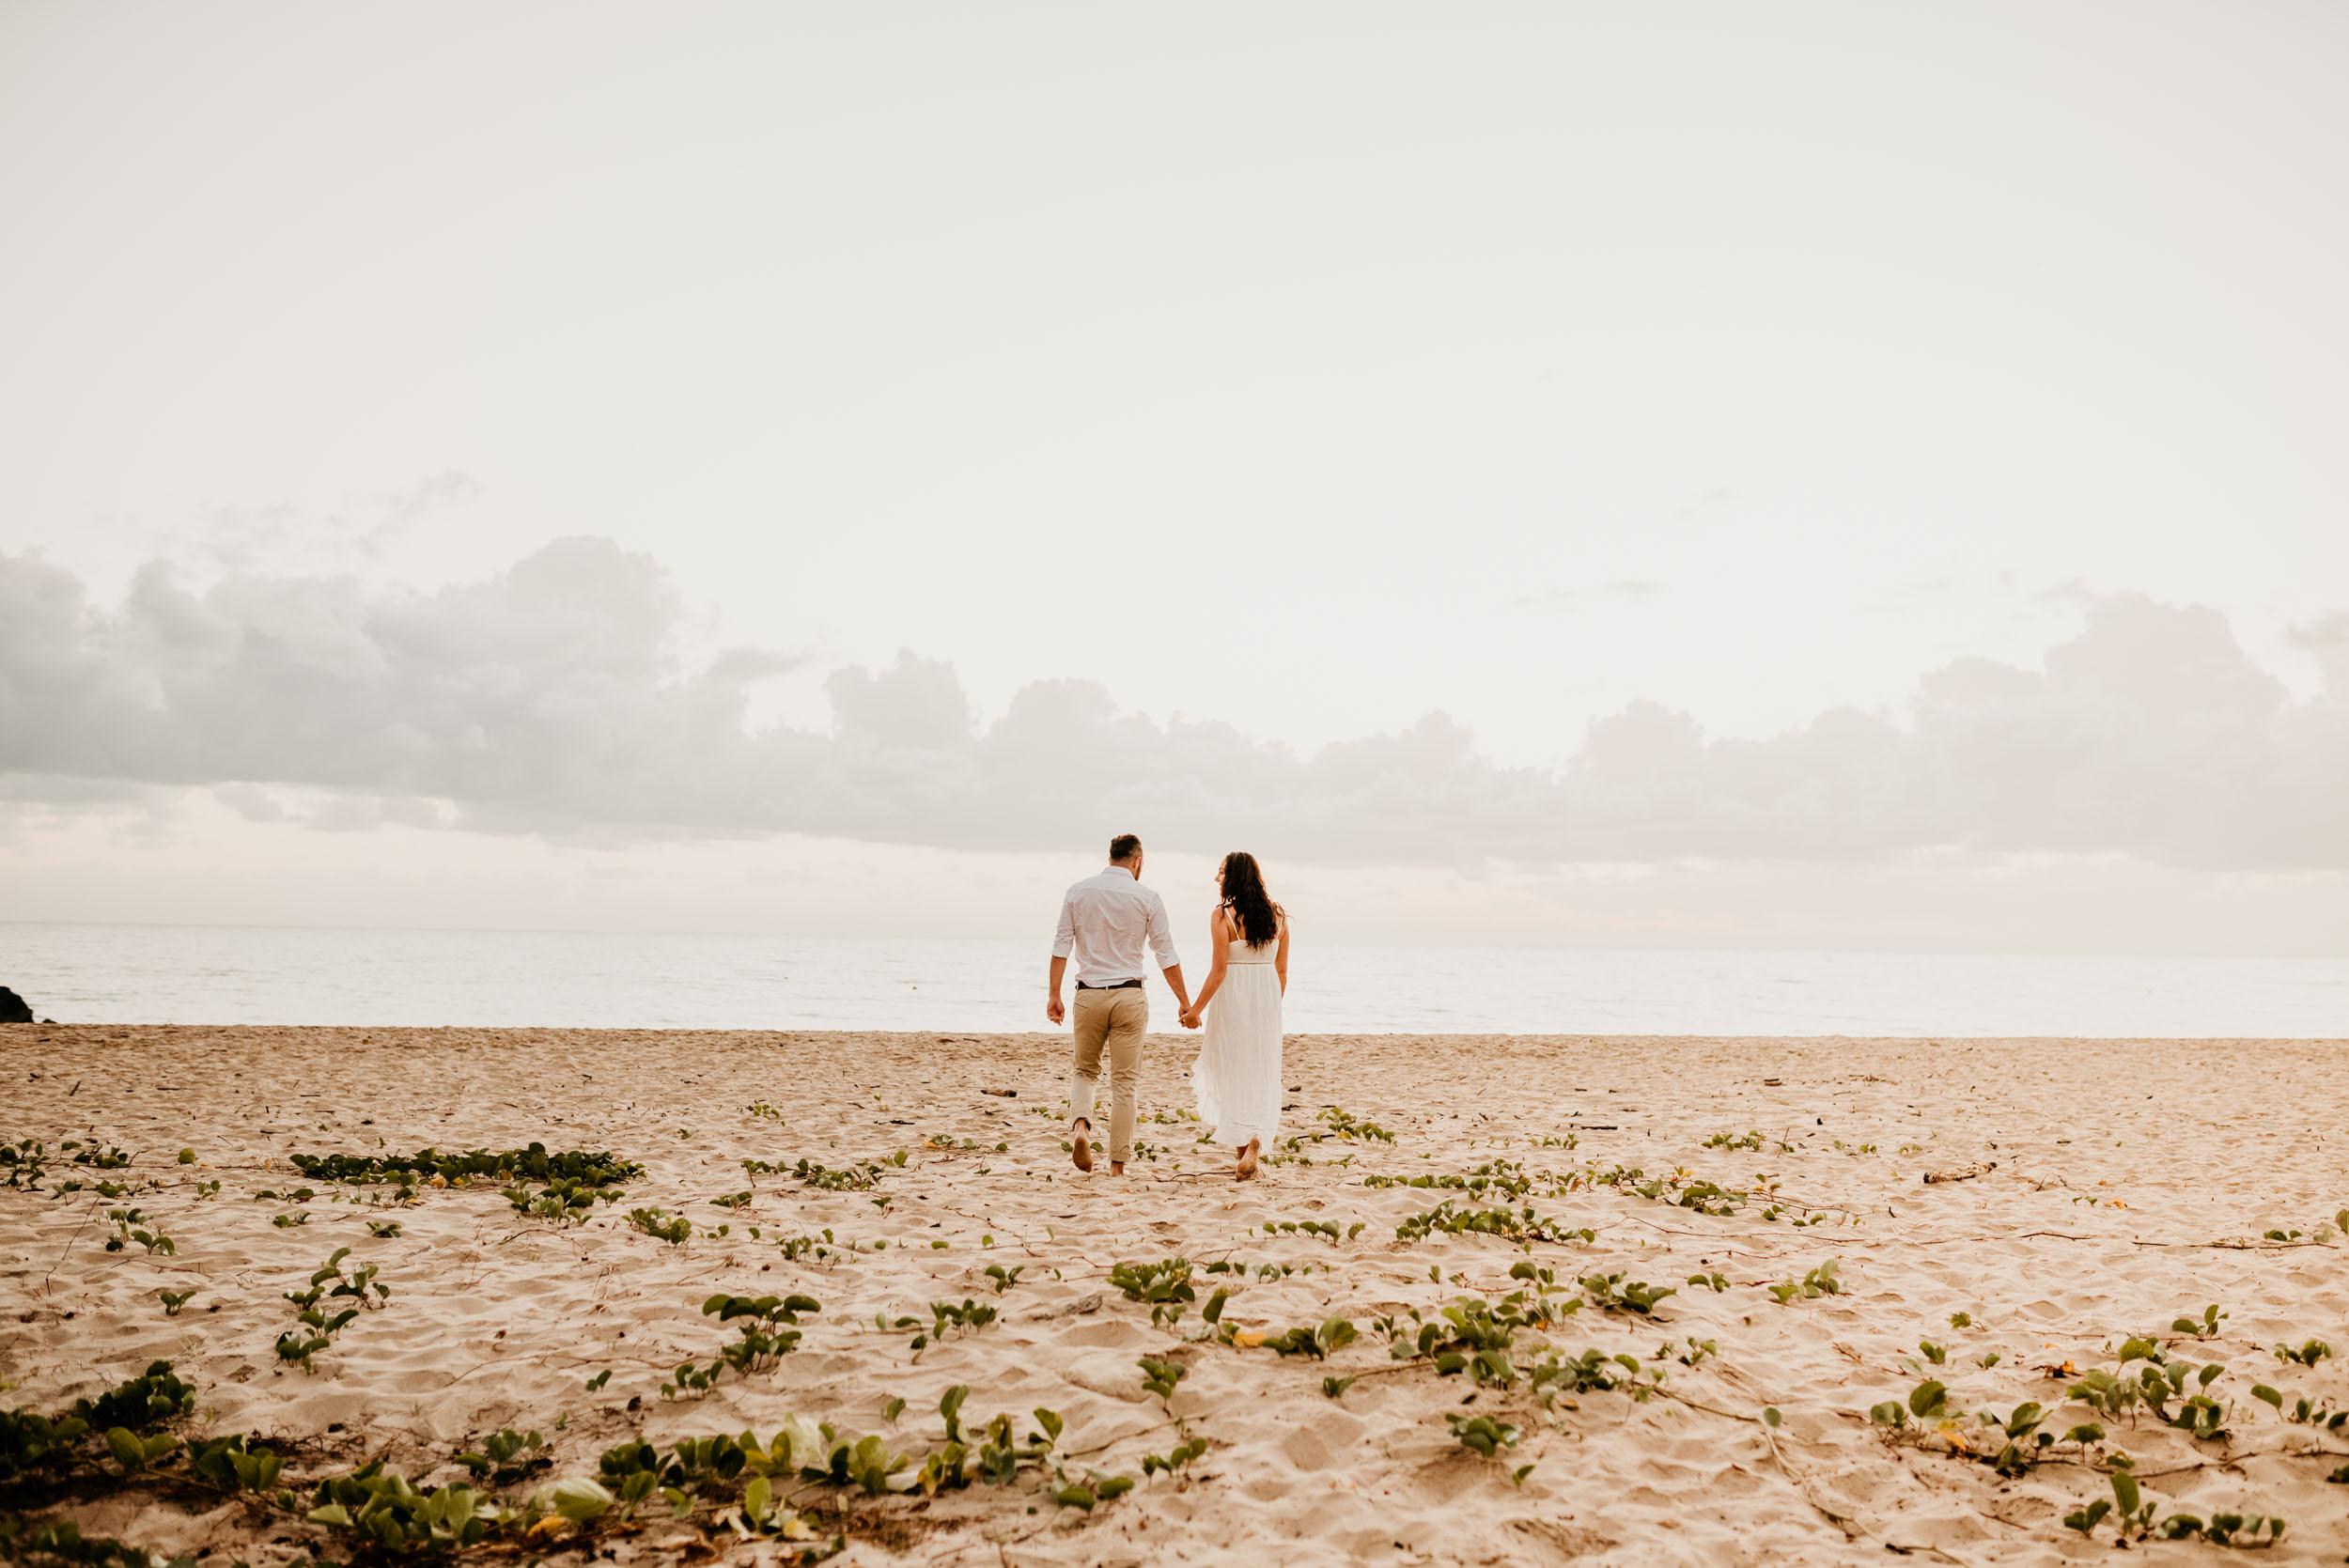 The Raw Photographer - Cairns Wedding Photographer - Engaged Engagement - Beach location - Candid Photography Queensland-1.jpg